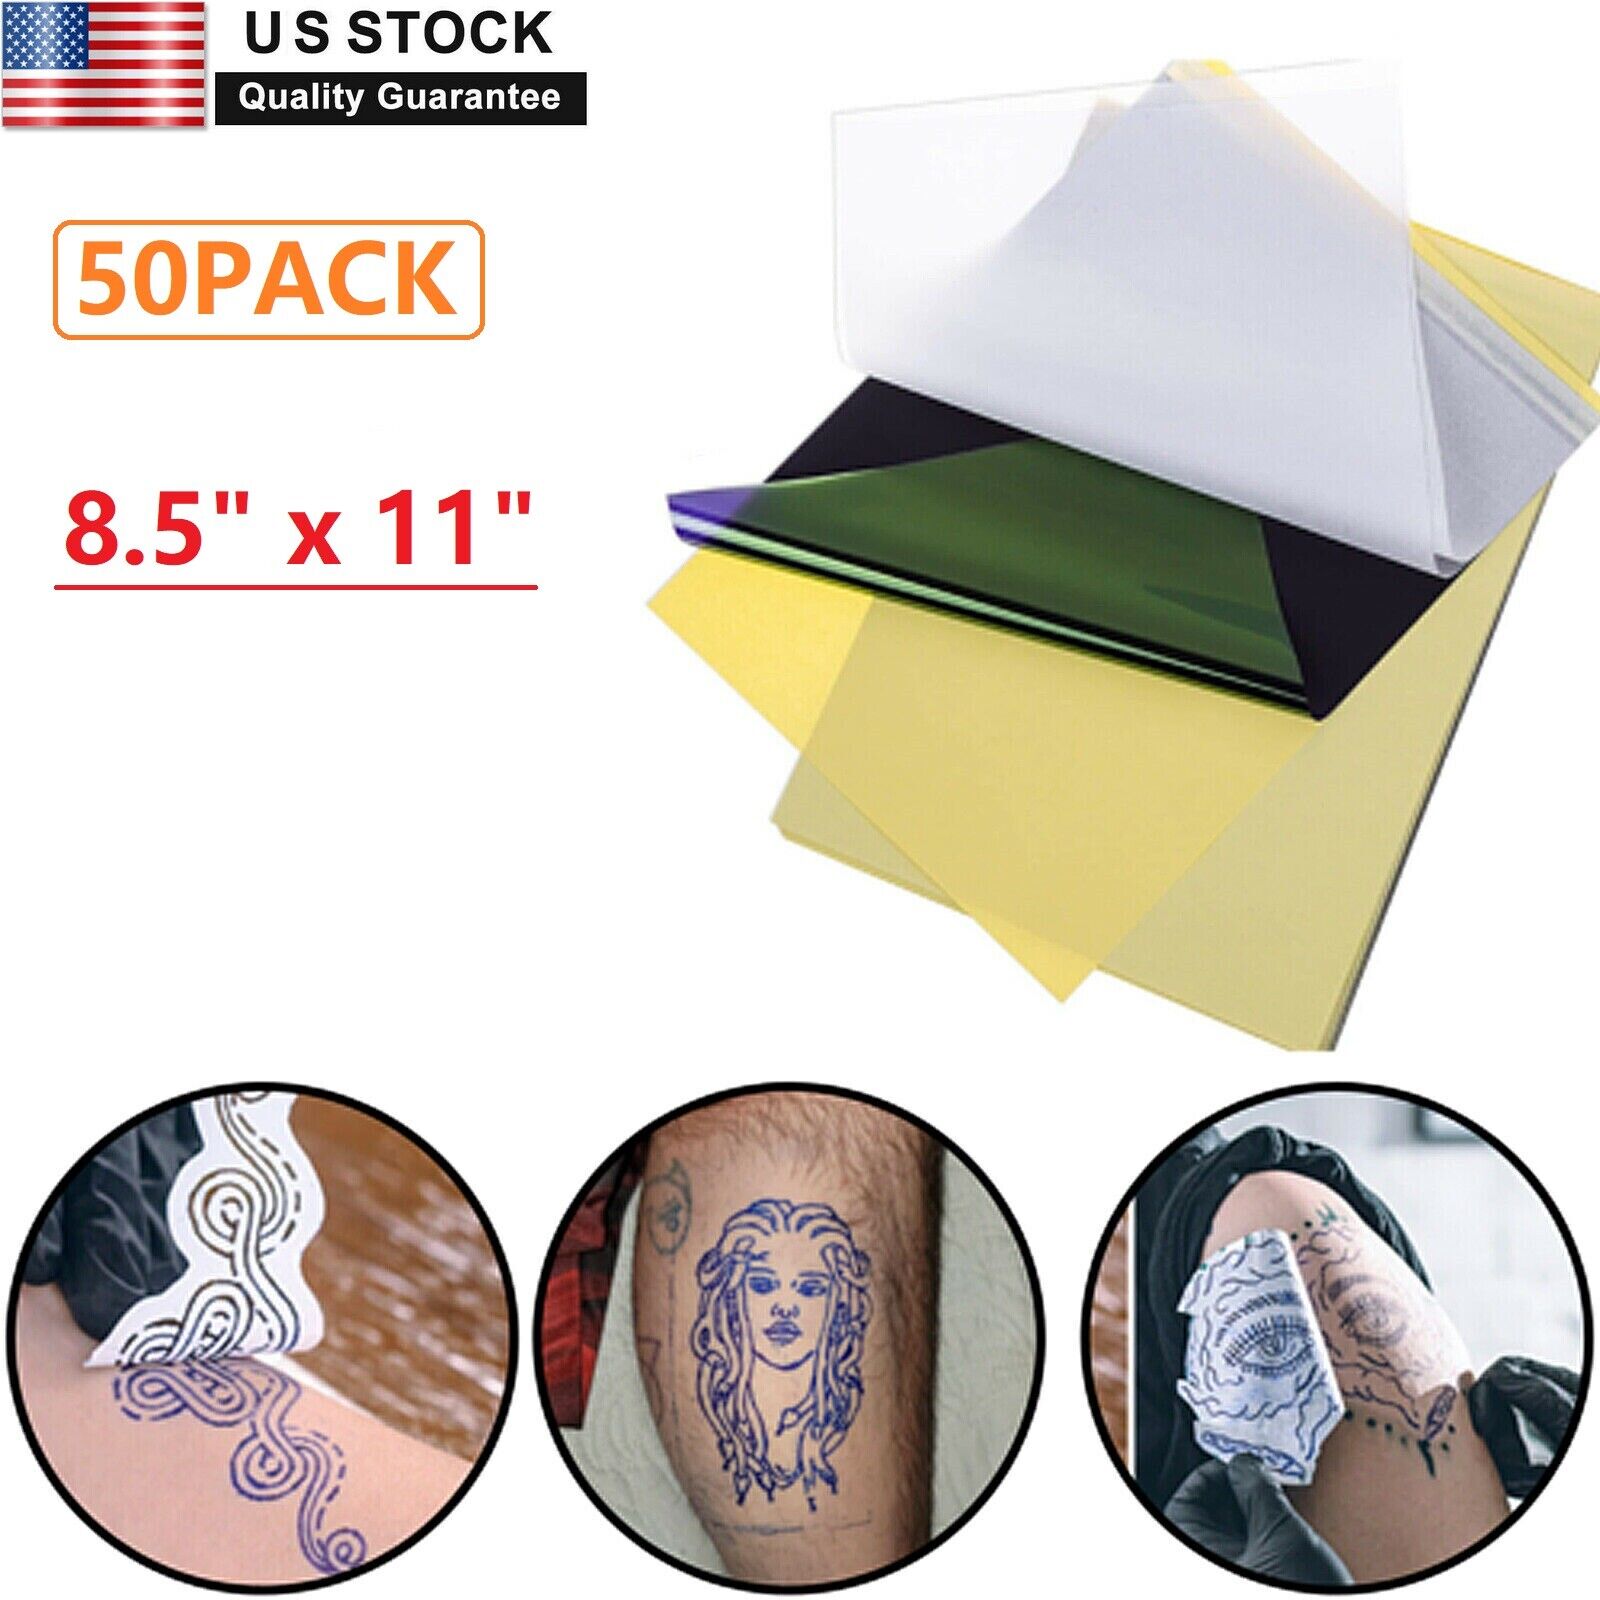 How to Use Tattoo Transfer Paper (with Pictures) - wikiHow